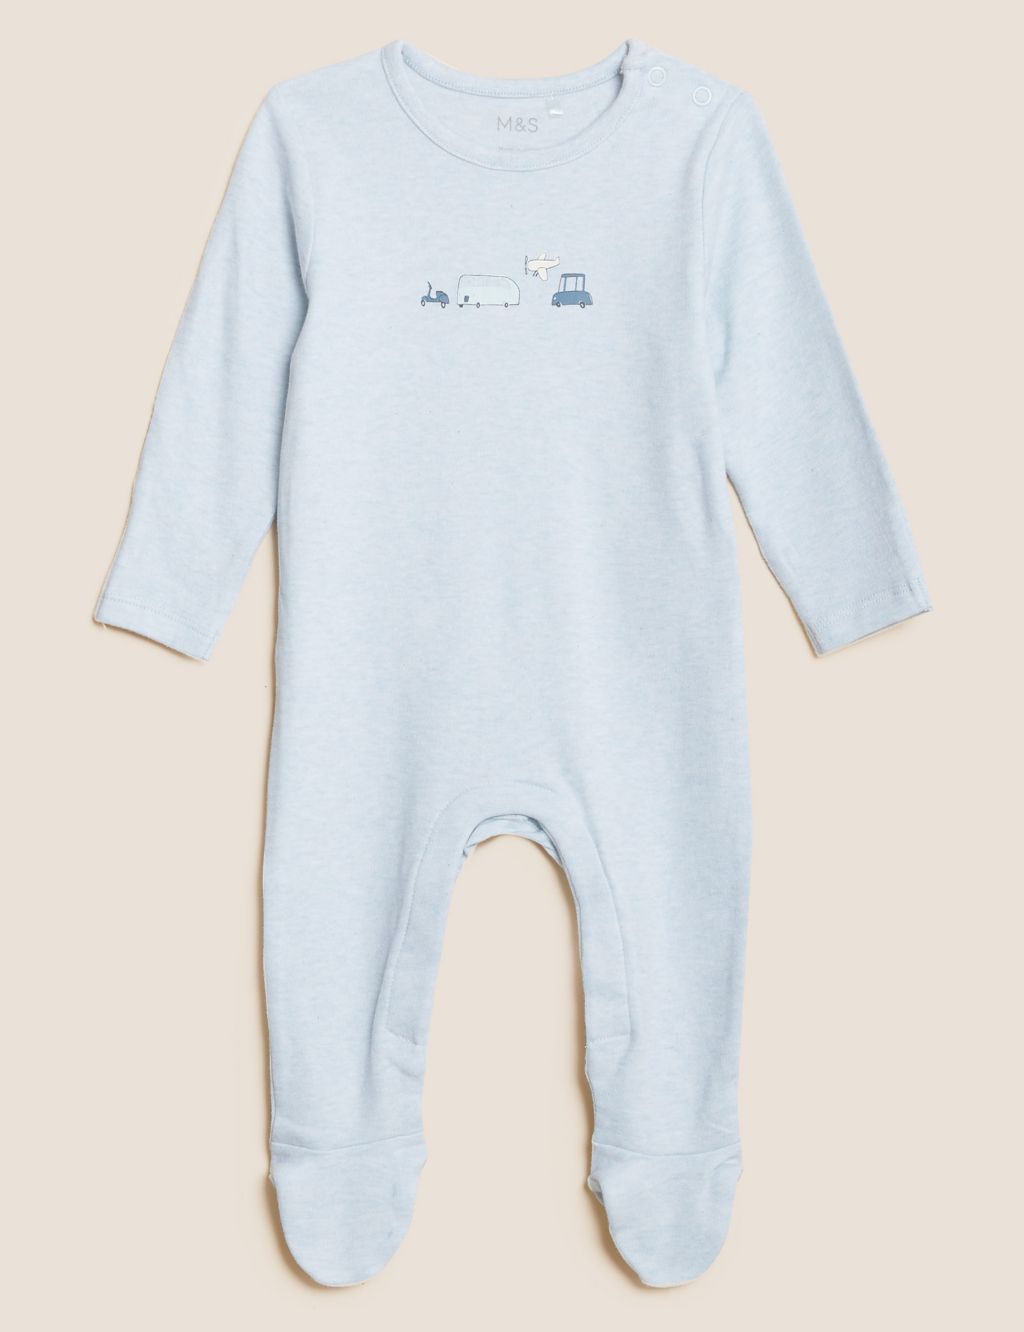 3pk Pure Cotton Transport Sleepsuits (61/2lbs - 3 Yrs) image 3